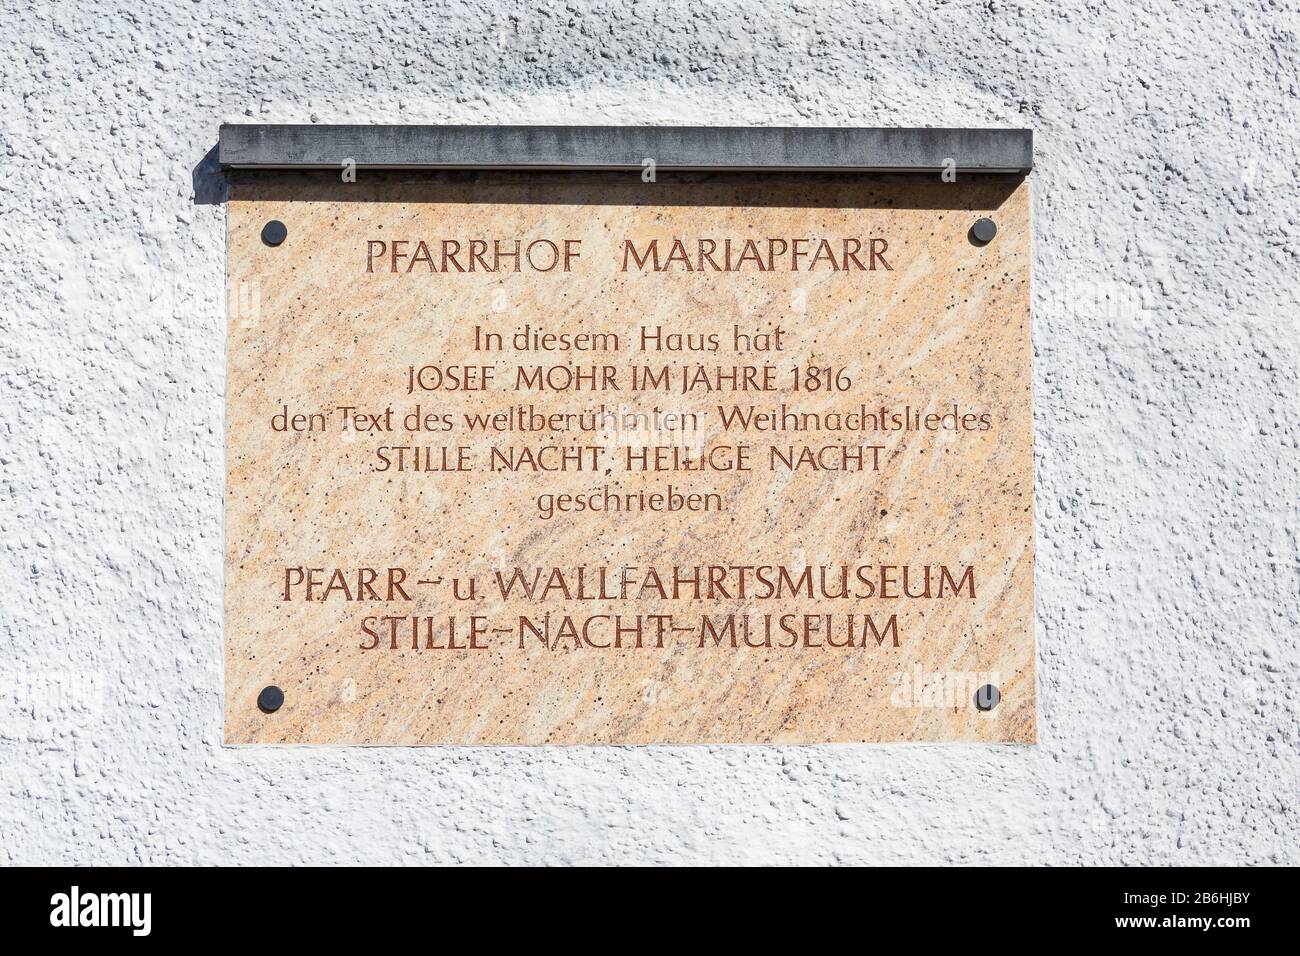 Plaque on the wall of the Silent Night Museum, Mariapfarr, Lungau, Salzburger Land, Austria Stock Photo